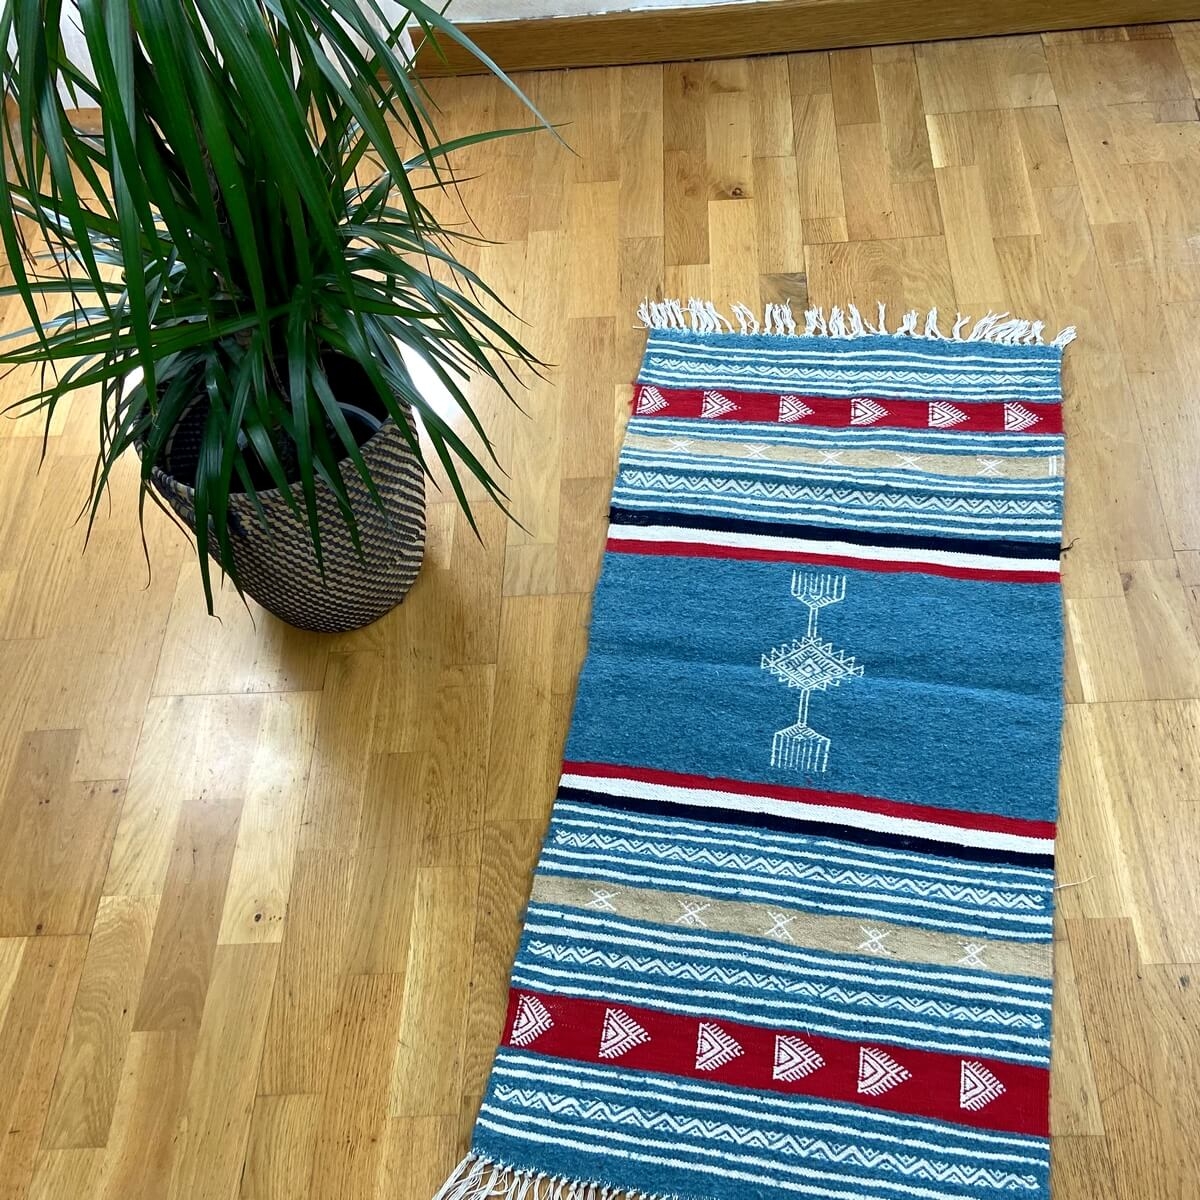 Rug Kilim Ebeles 56x116 Blue Turquoise, Turquoise And Red Rug